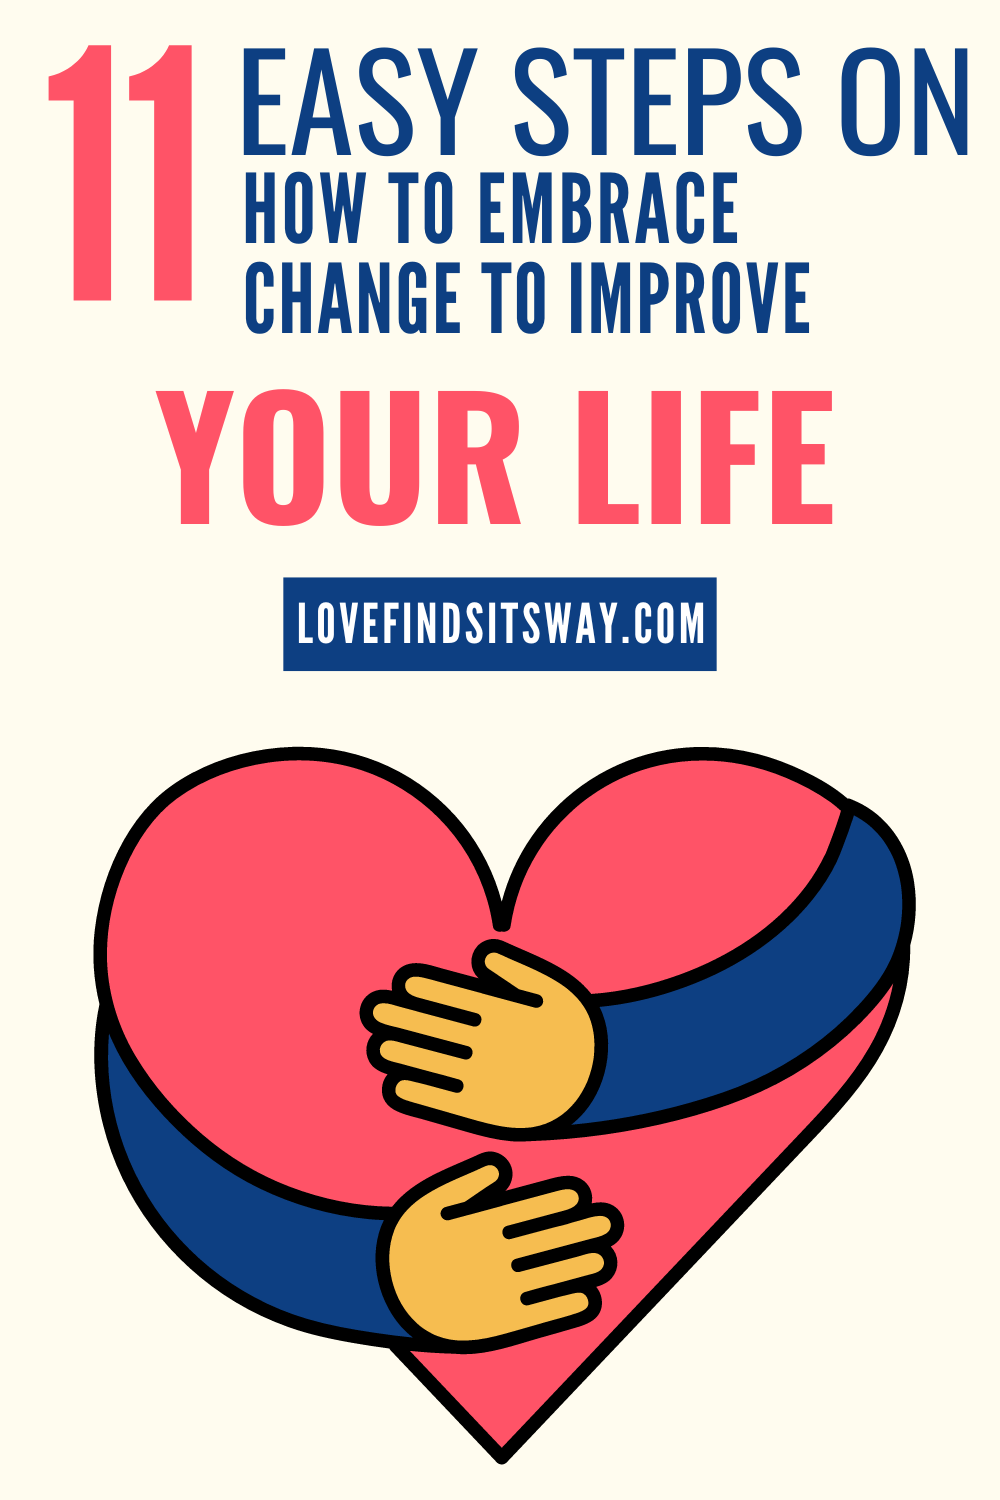 11-Easy-Steps-on-How-To-Embrace-Change-to-Improve-Your-Life